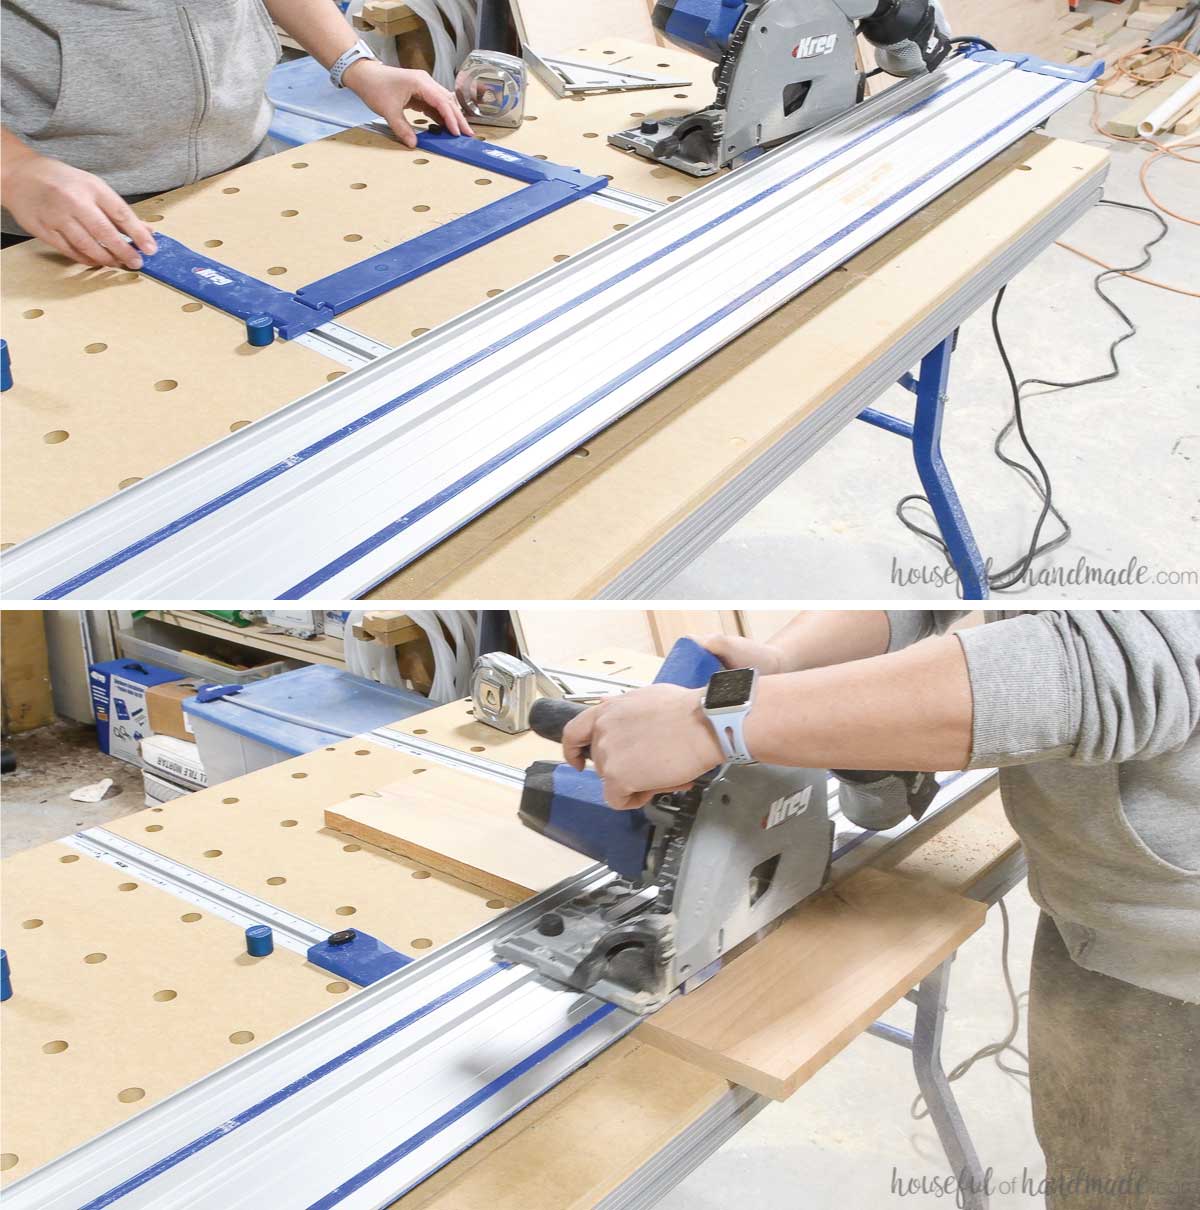 Sliding the measuring gauge and bridge into place to rip 1 1/2" wide boards on the ACS.